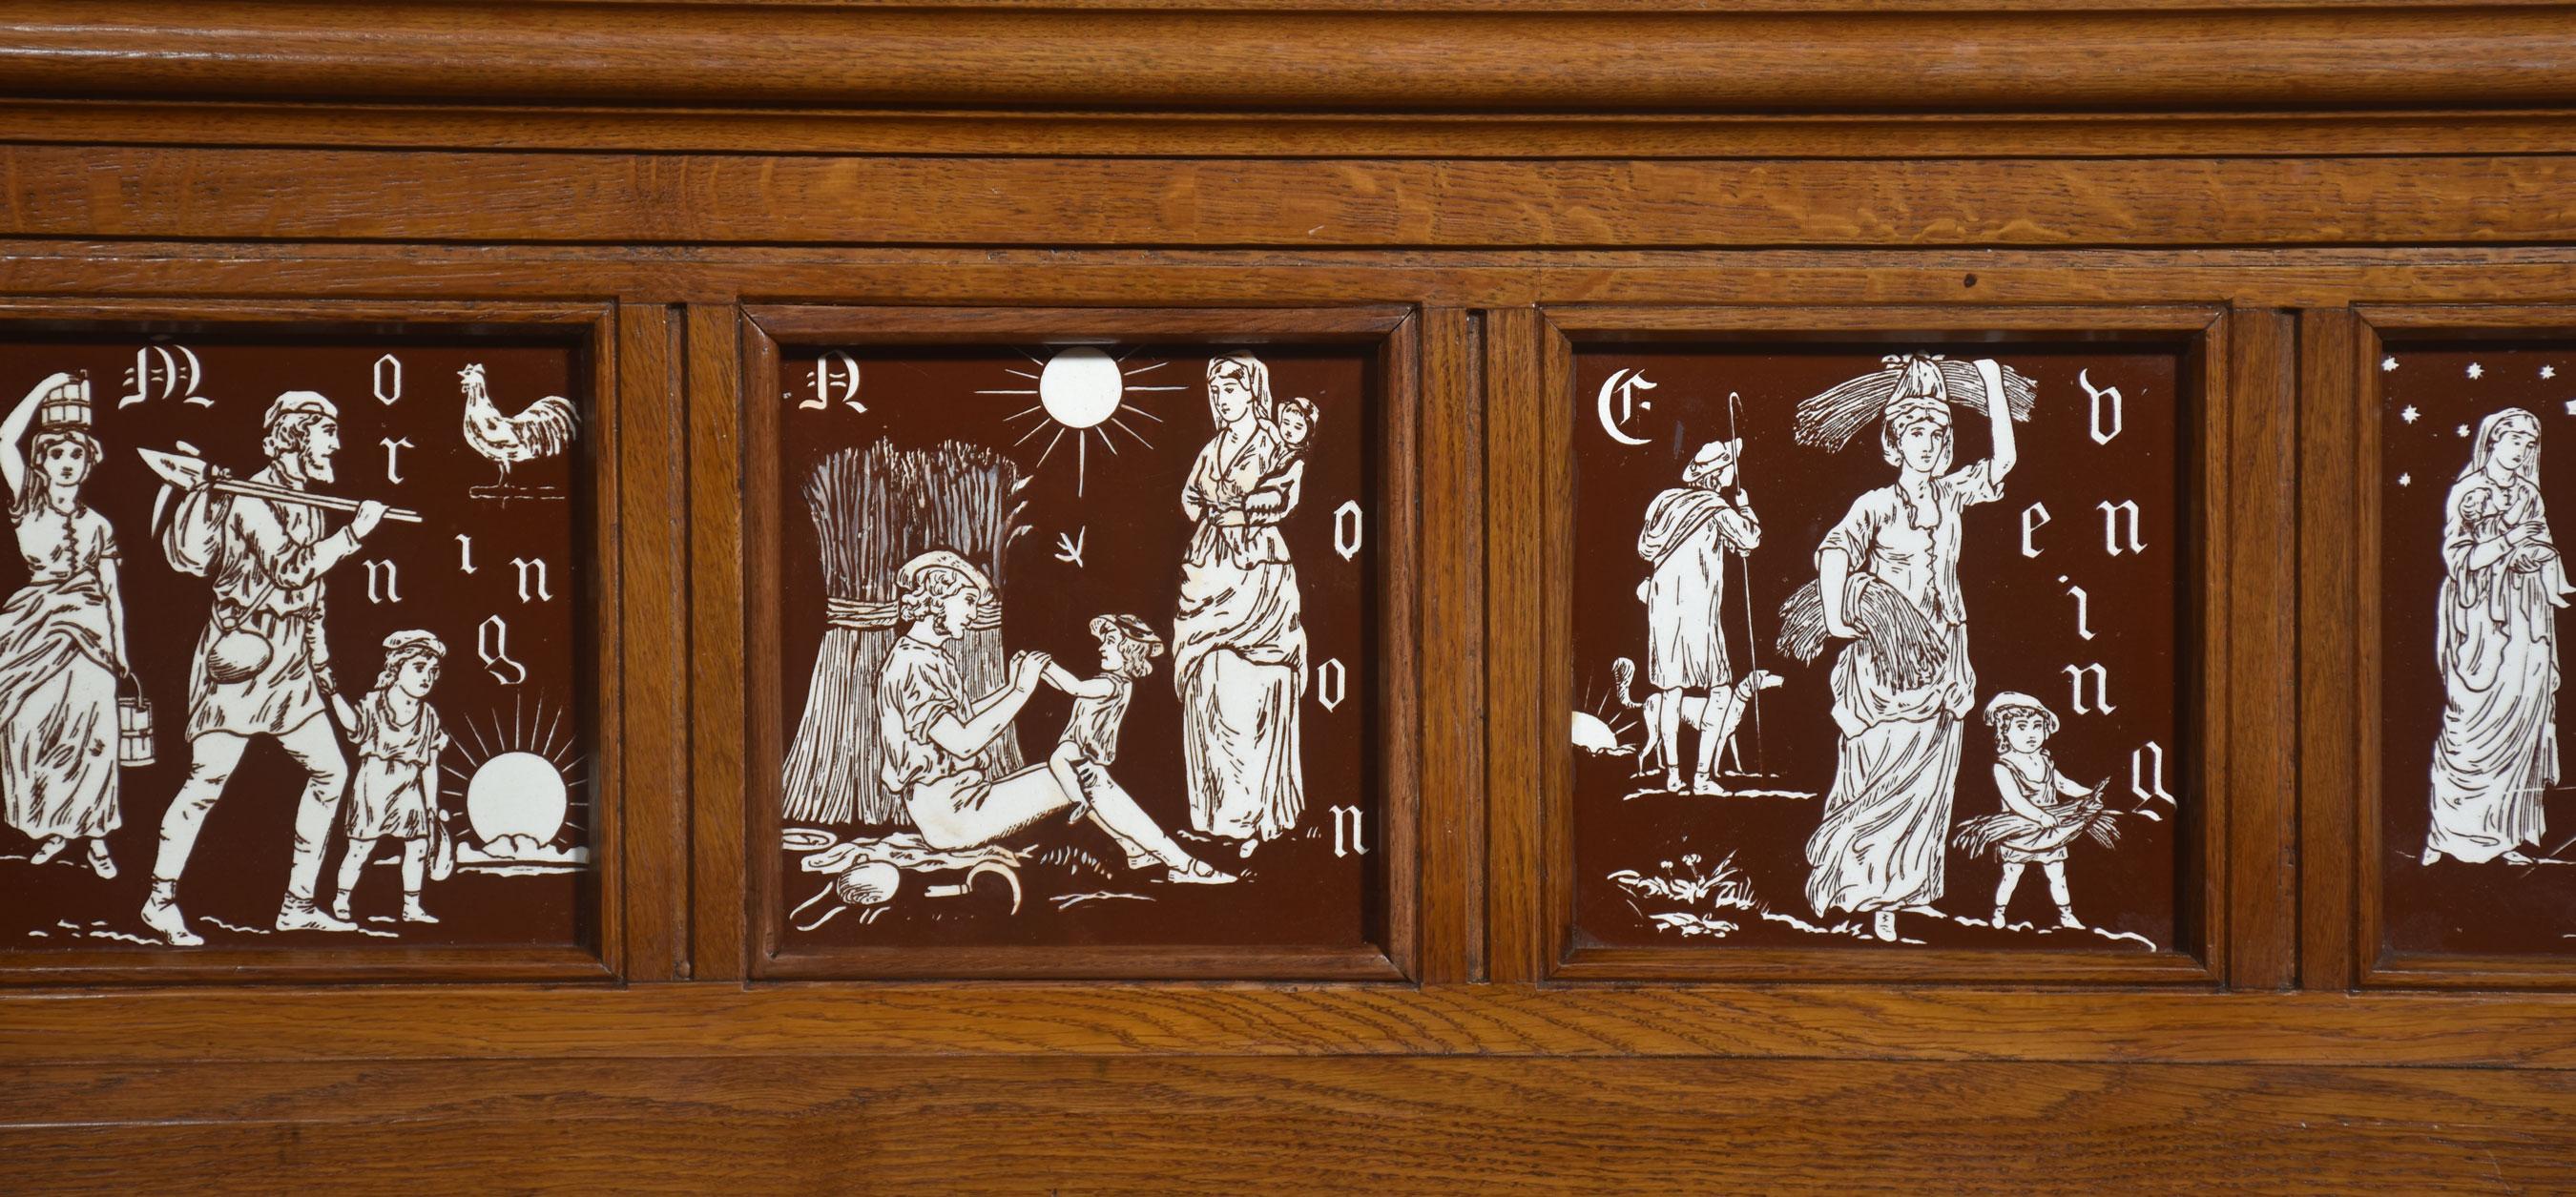 Set of four Minton holies tiles depicting Morning, Noon, Evening and night. Encased in solid oak frame.
Dimensions
Height 16.5 Inches
Width 72.5 Inches
Depth 4 Inches